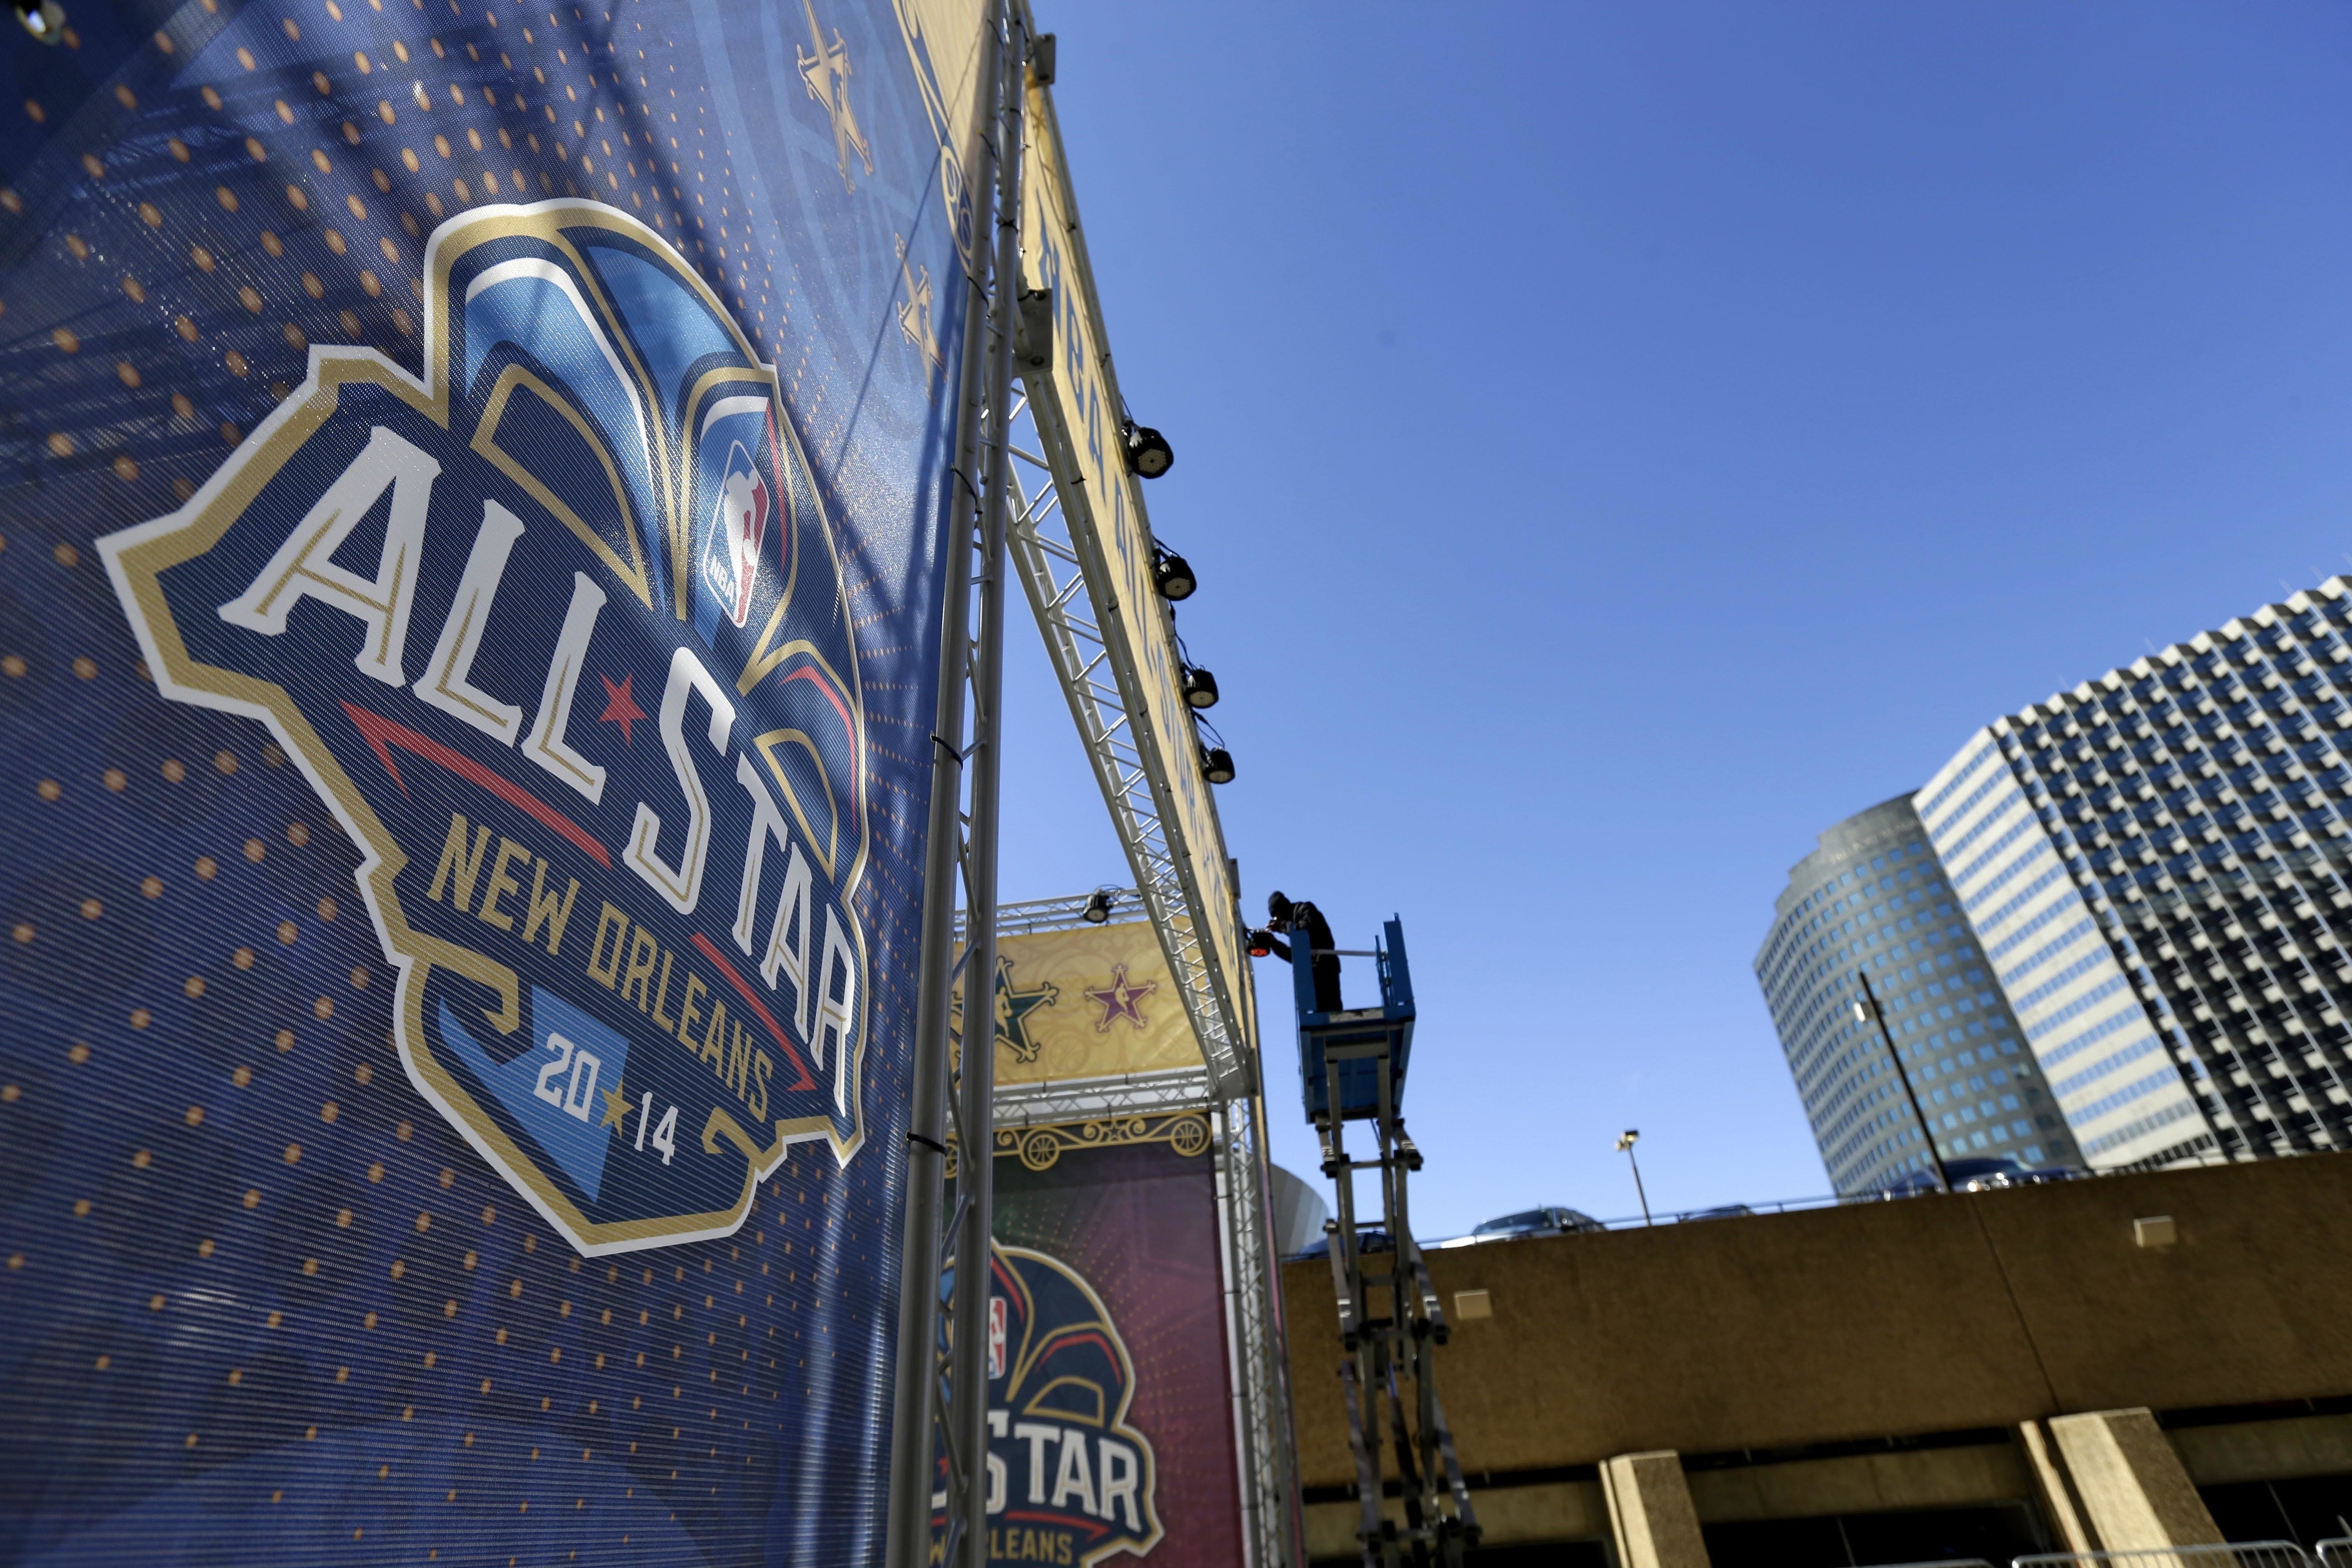 A worker attaches a banner to a scaffolding in New Orleans in preparation of the 2014 NBA All-Star basketball game. The NBA has decided to hold the 2017 All-Star Game in New Orleans, a person familiar with the decision told The Associated Press. The person spoke to the AP on condition of anonymity Friday, Aug. 19, 2016, because the decision hasn't been announced. New Orleans replaces Charlotte, which was set to host the game until the NBA decided last month that it wouldn't hold its marquee, mid-season event in North Carolina because of a state law that limits anti-discrimination protections for lesbian, gay and transgender people.